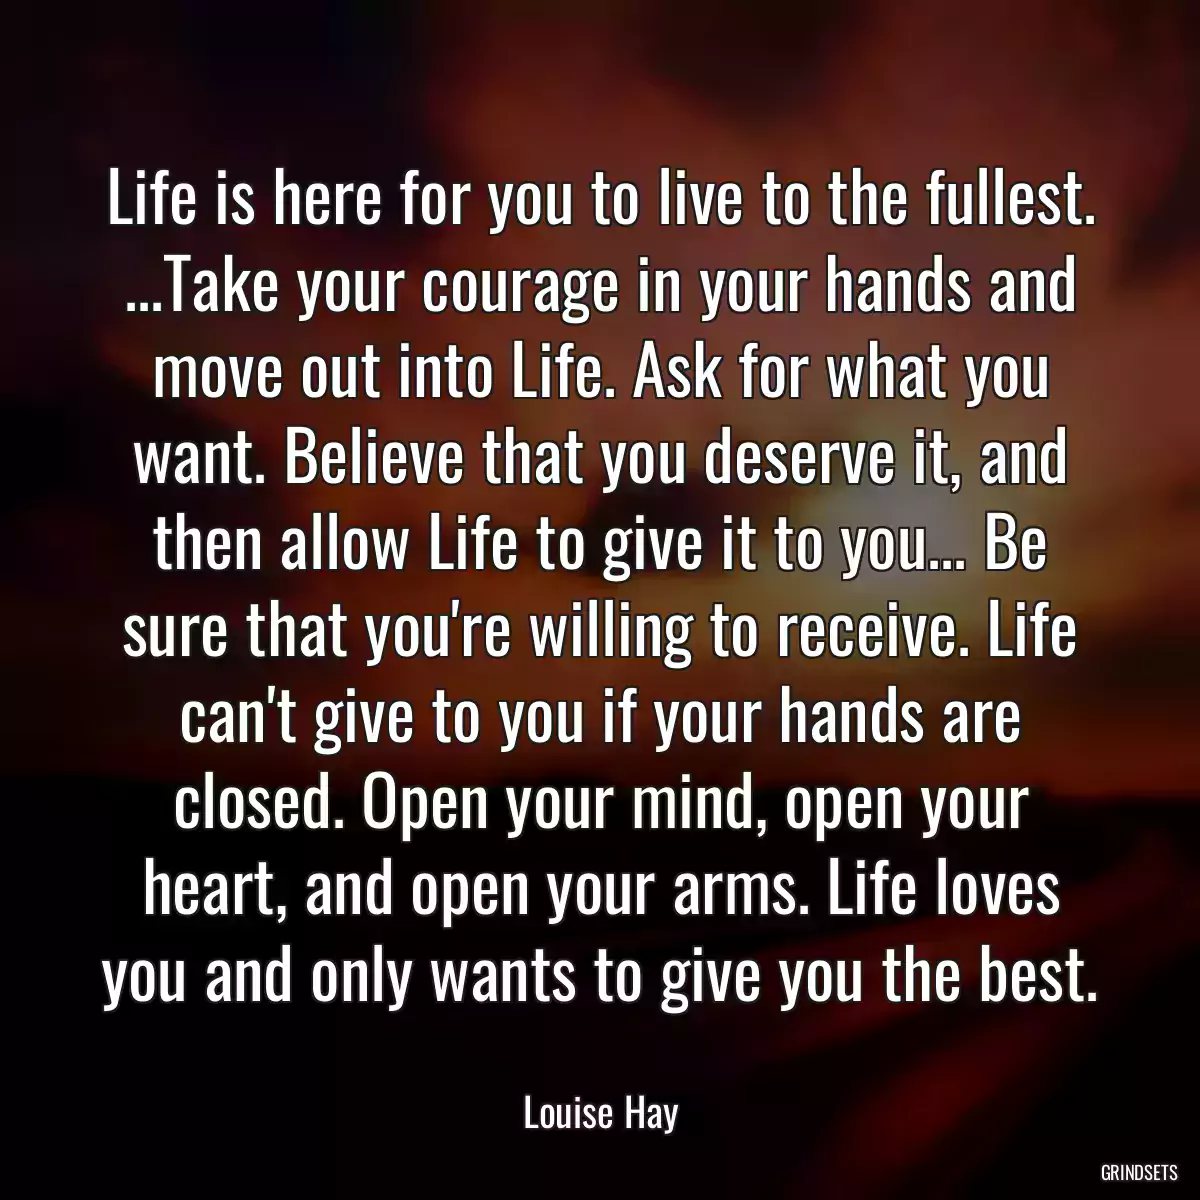 Life is here for you to live to the fullest. ...Take your courage in your hands and move out into Life. Ask for what you want. Believe that you deserve it, and then allow Life to give it to you... Be sure that you\'re willing to receive. Life can\'t give to you if your hands are closed. Open your mind, open your heart, and open your arms. Life loves you and only wants to give you the best.